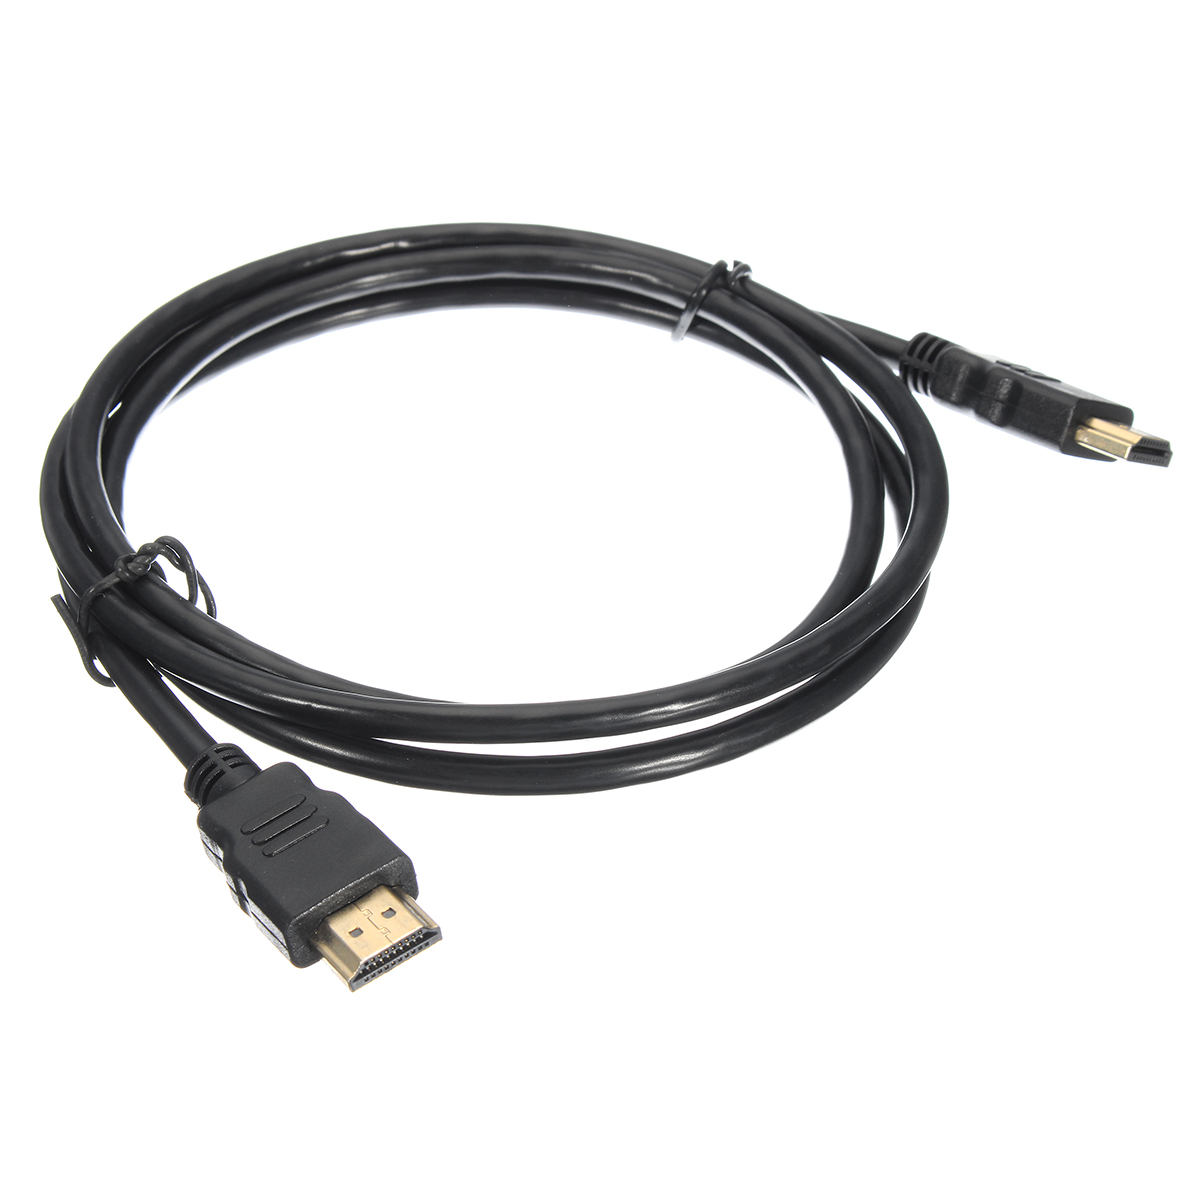 15M-High-Definition-Multimedia-Interface-Cable-Black-for-HDTV-XBox-Projectors-1225927-3